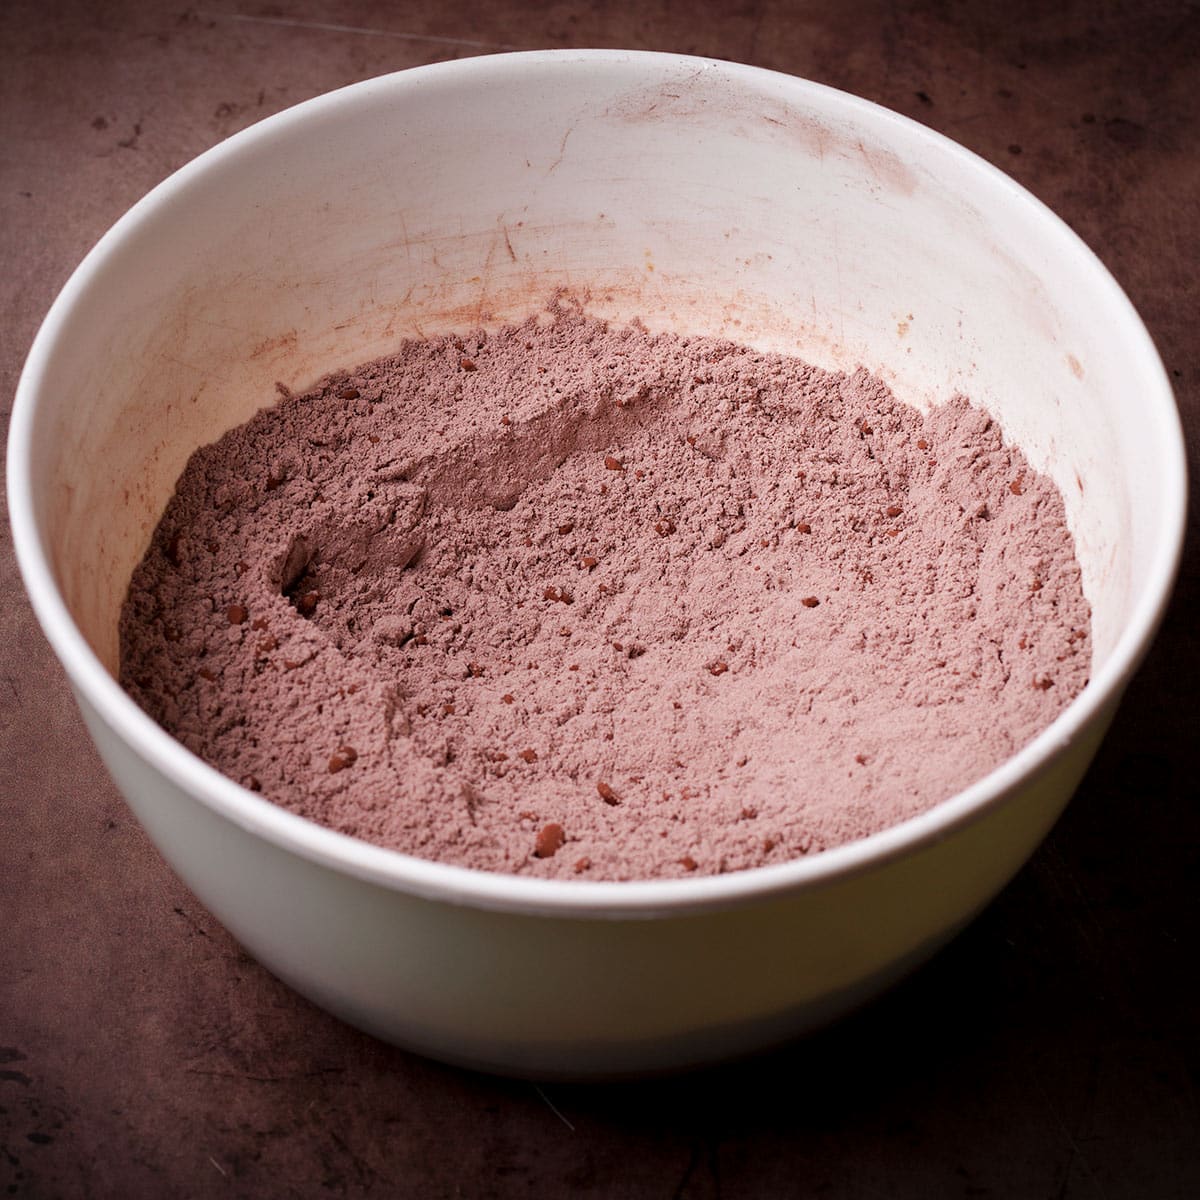 All the dry ingredients used in this Dutch oven chocolate cake recipe mixed together in a mixing bowl.